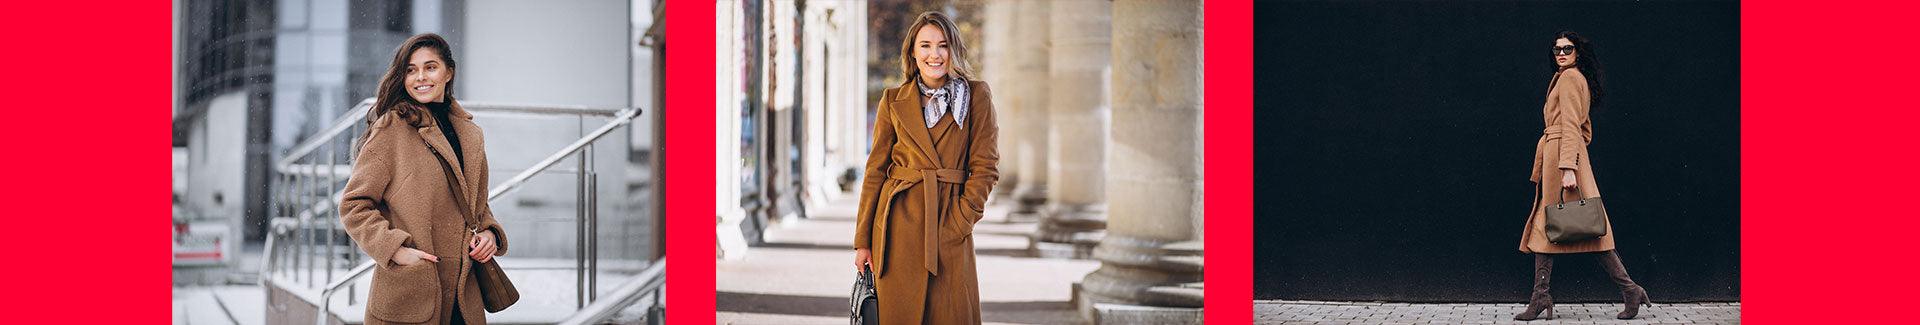 Stylish Women's Coats for Sale Online - Daily Fashion